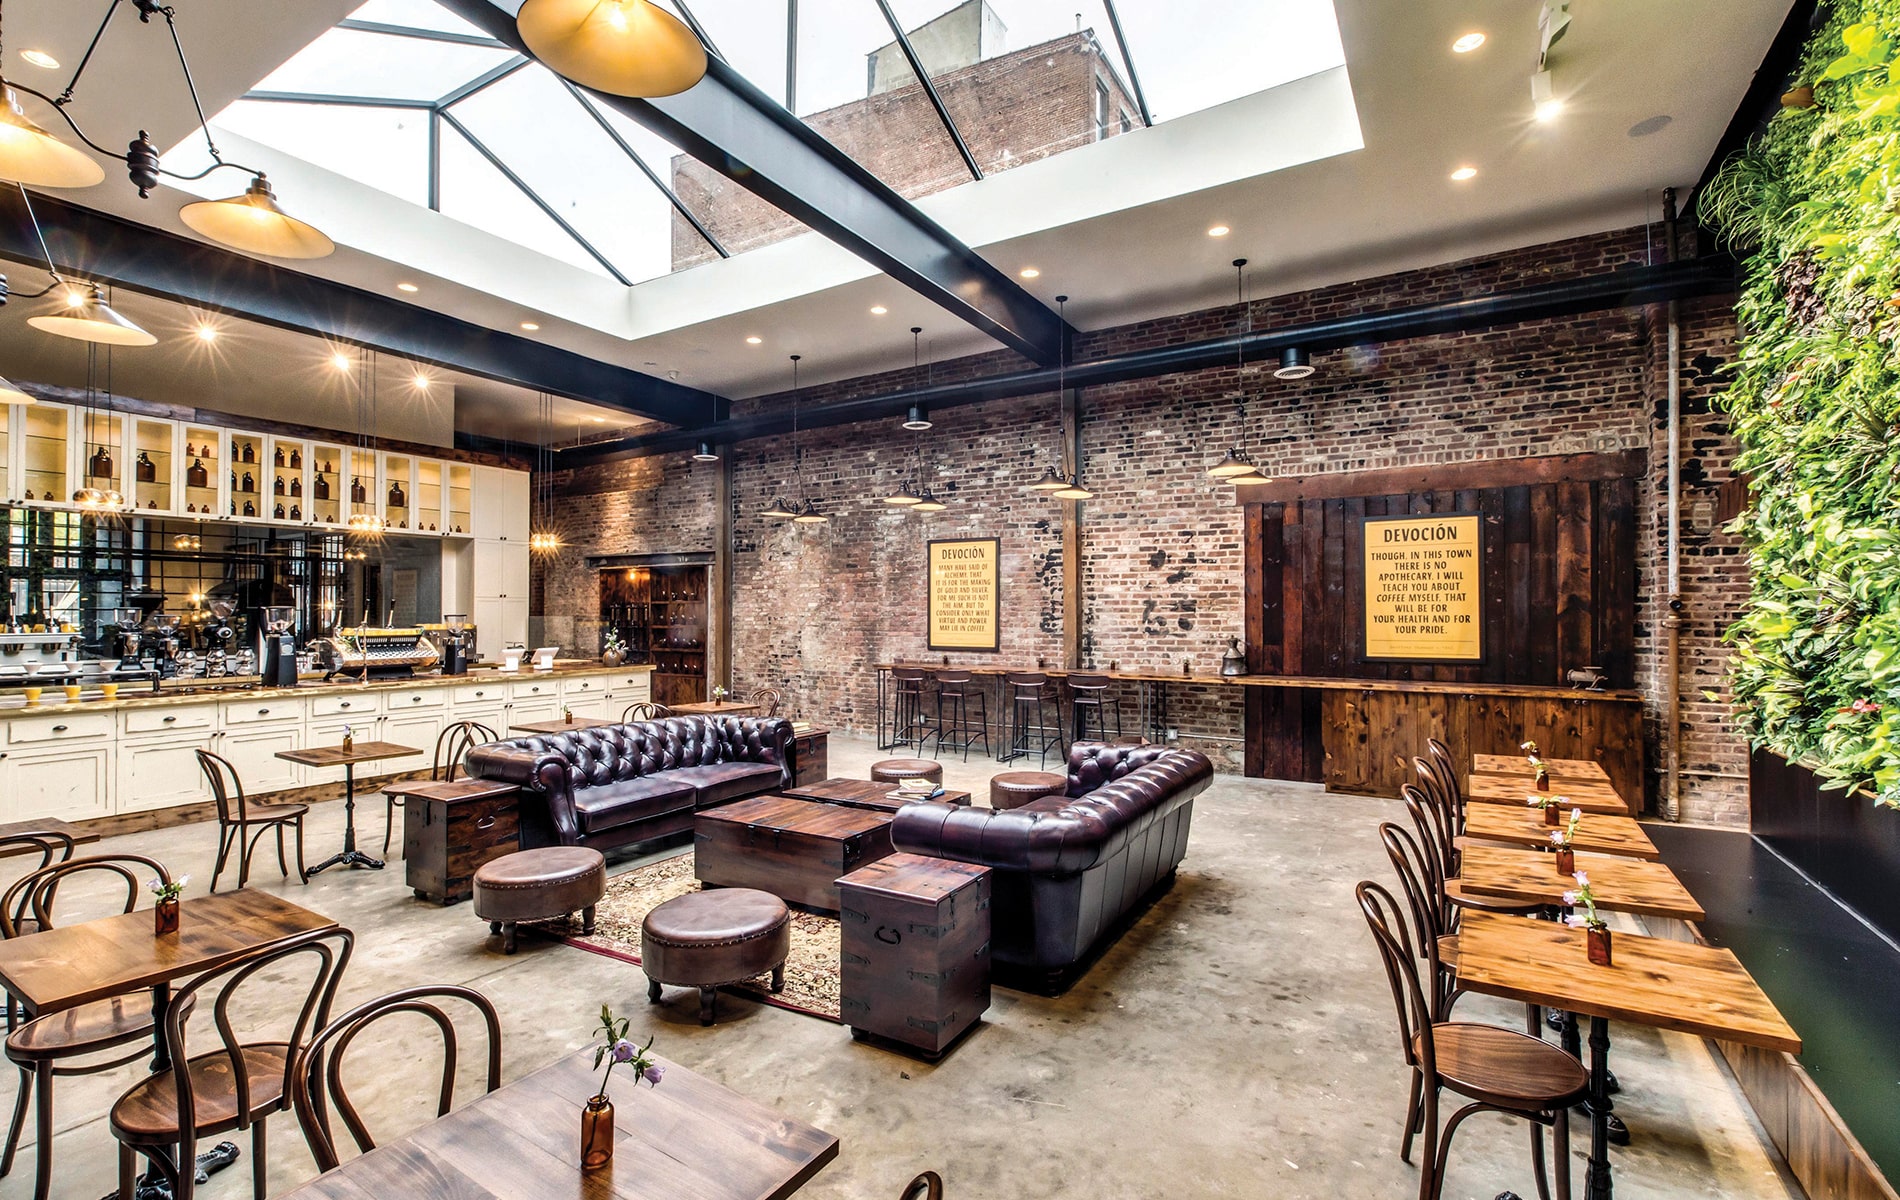 Devoción, a local favorite in the heart of Williamsburg, offers visitors a unique experience with an exquisite custom bar and beautiful leather couches in the center of the café. | Photo courtesy of Devoción